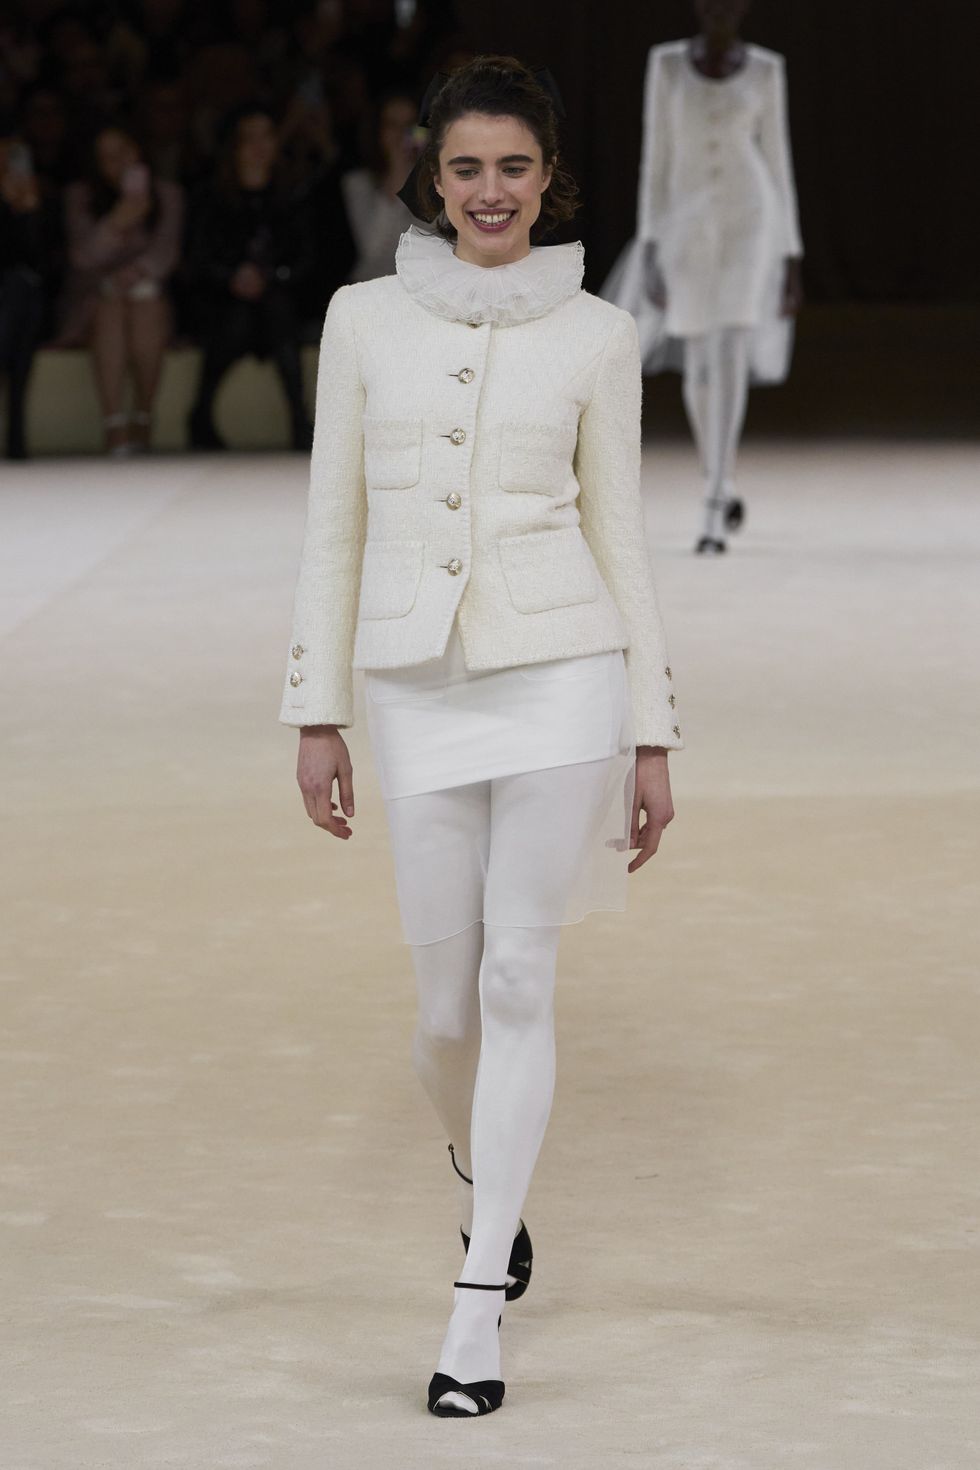 margaret qualley wears a white ruff suit at the chanel couture show